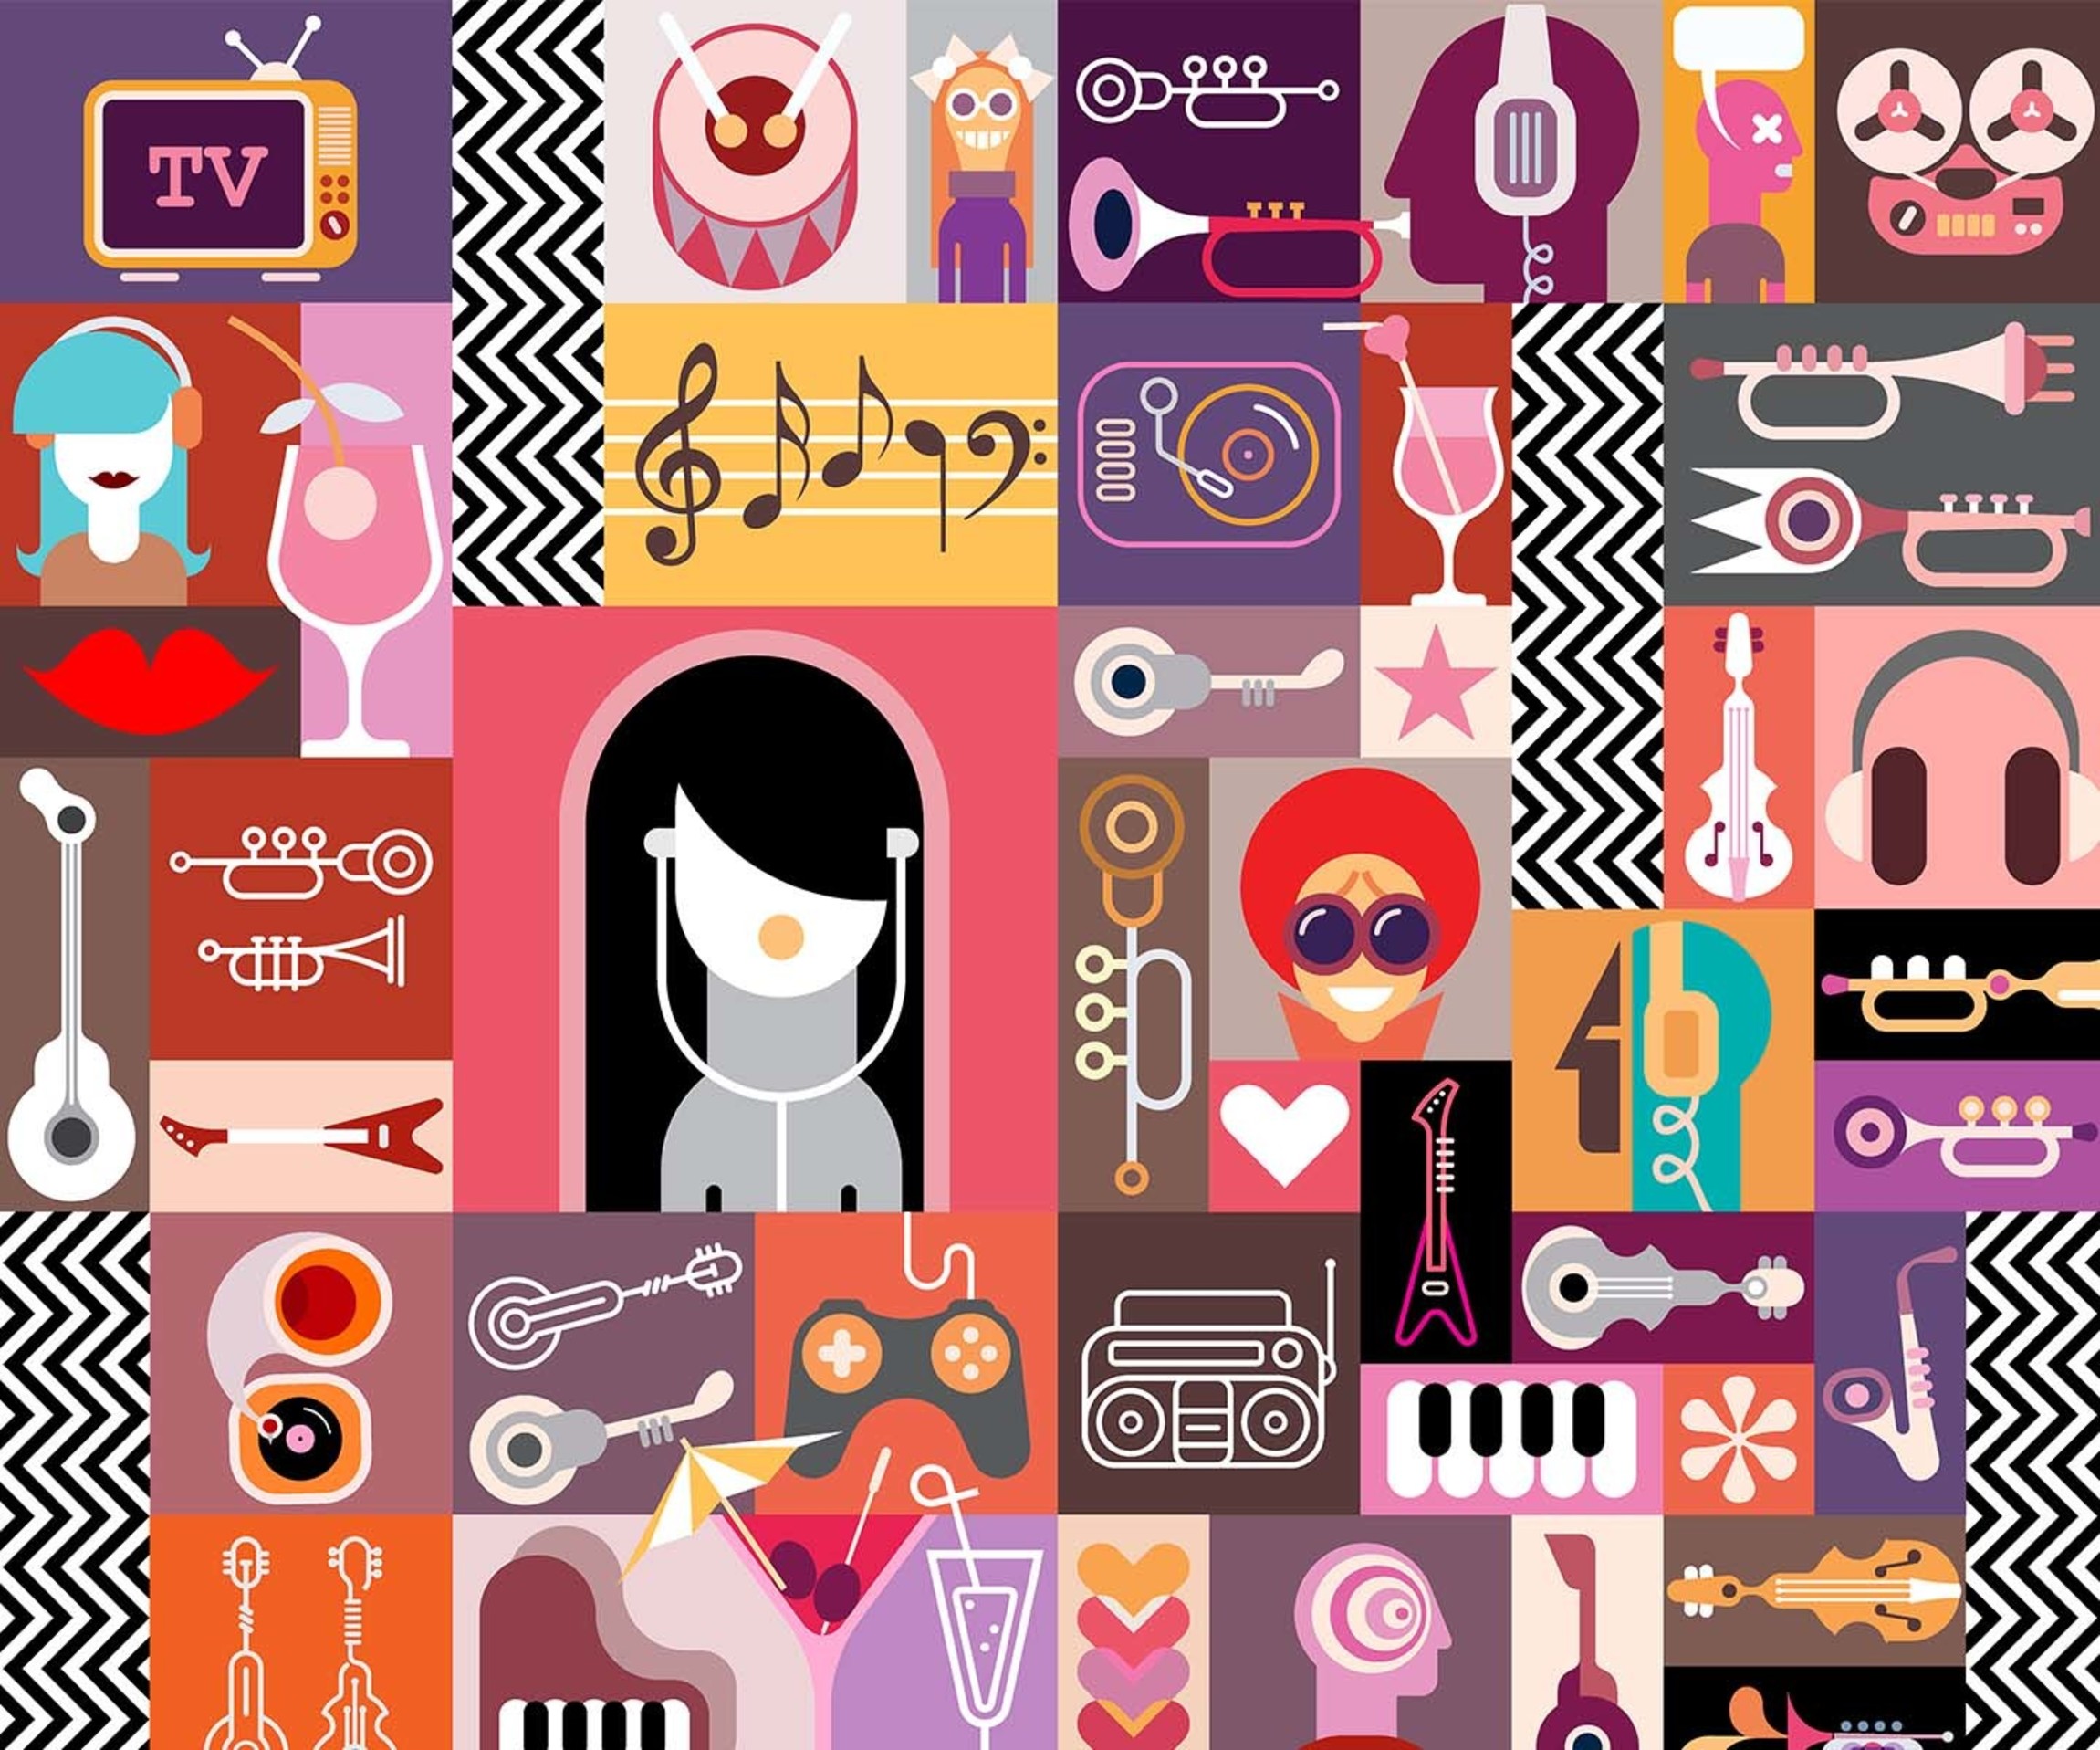 32 Great Websites for Free Vector Art, Images, Graphics, and.